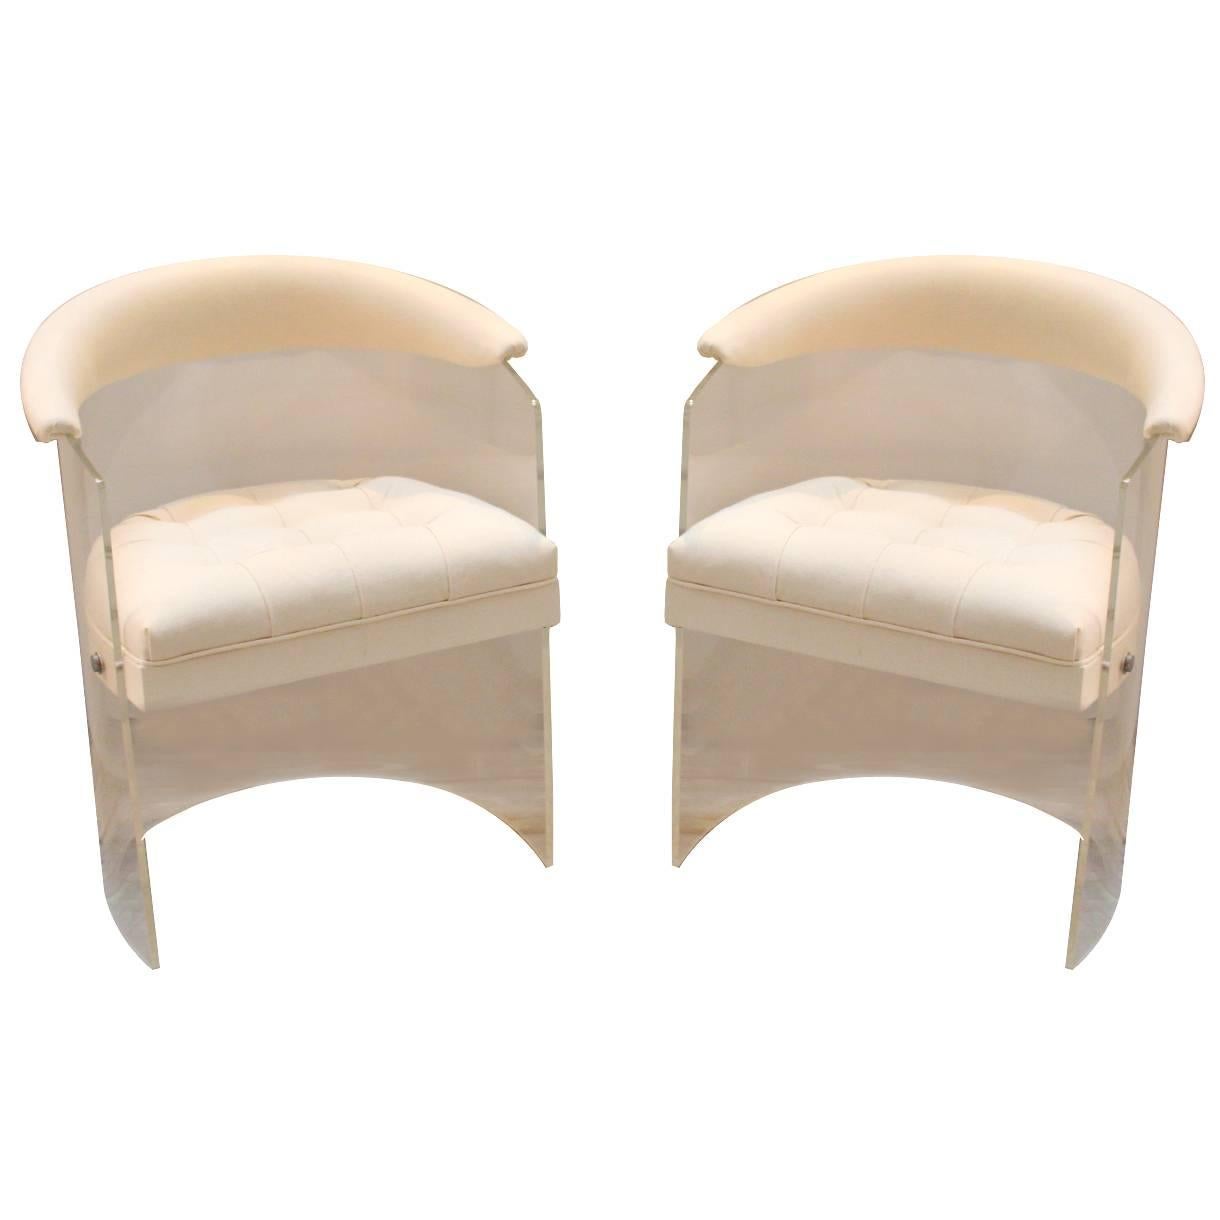 Diminutive Pair of Mid-Century Lucite Barrel Back Chairs